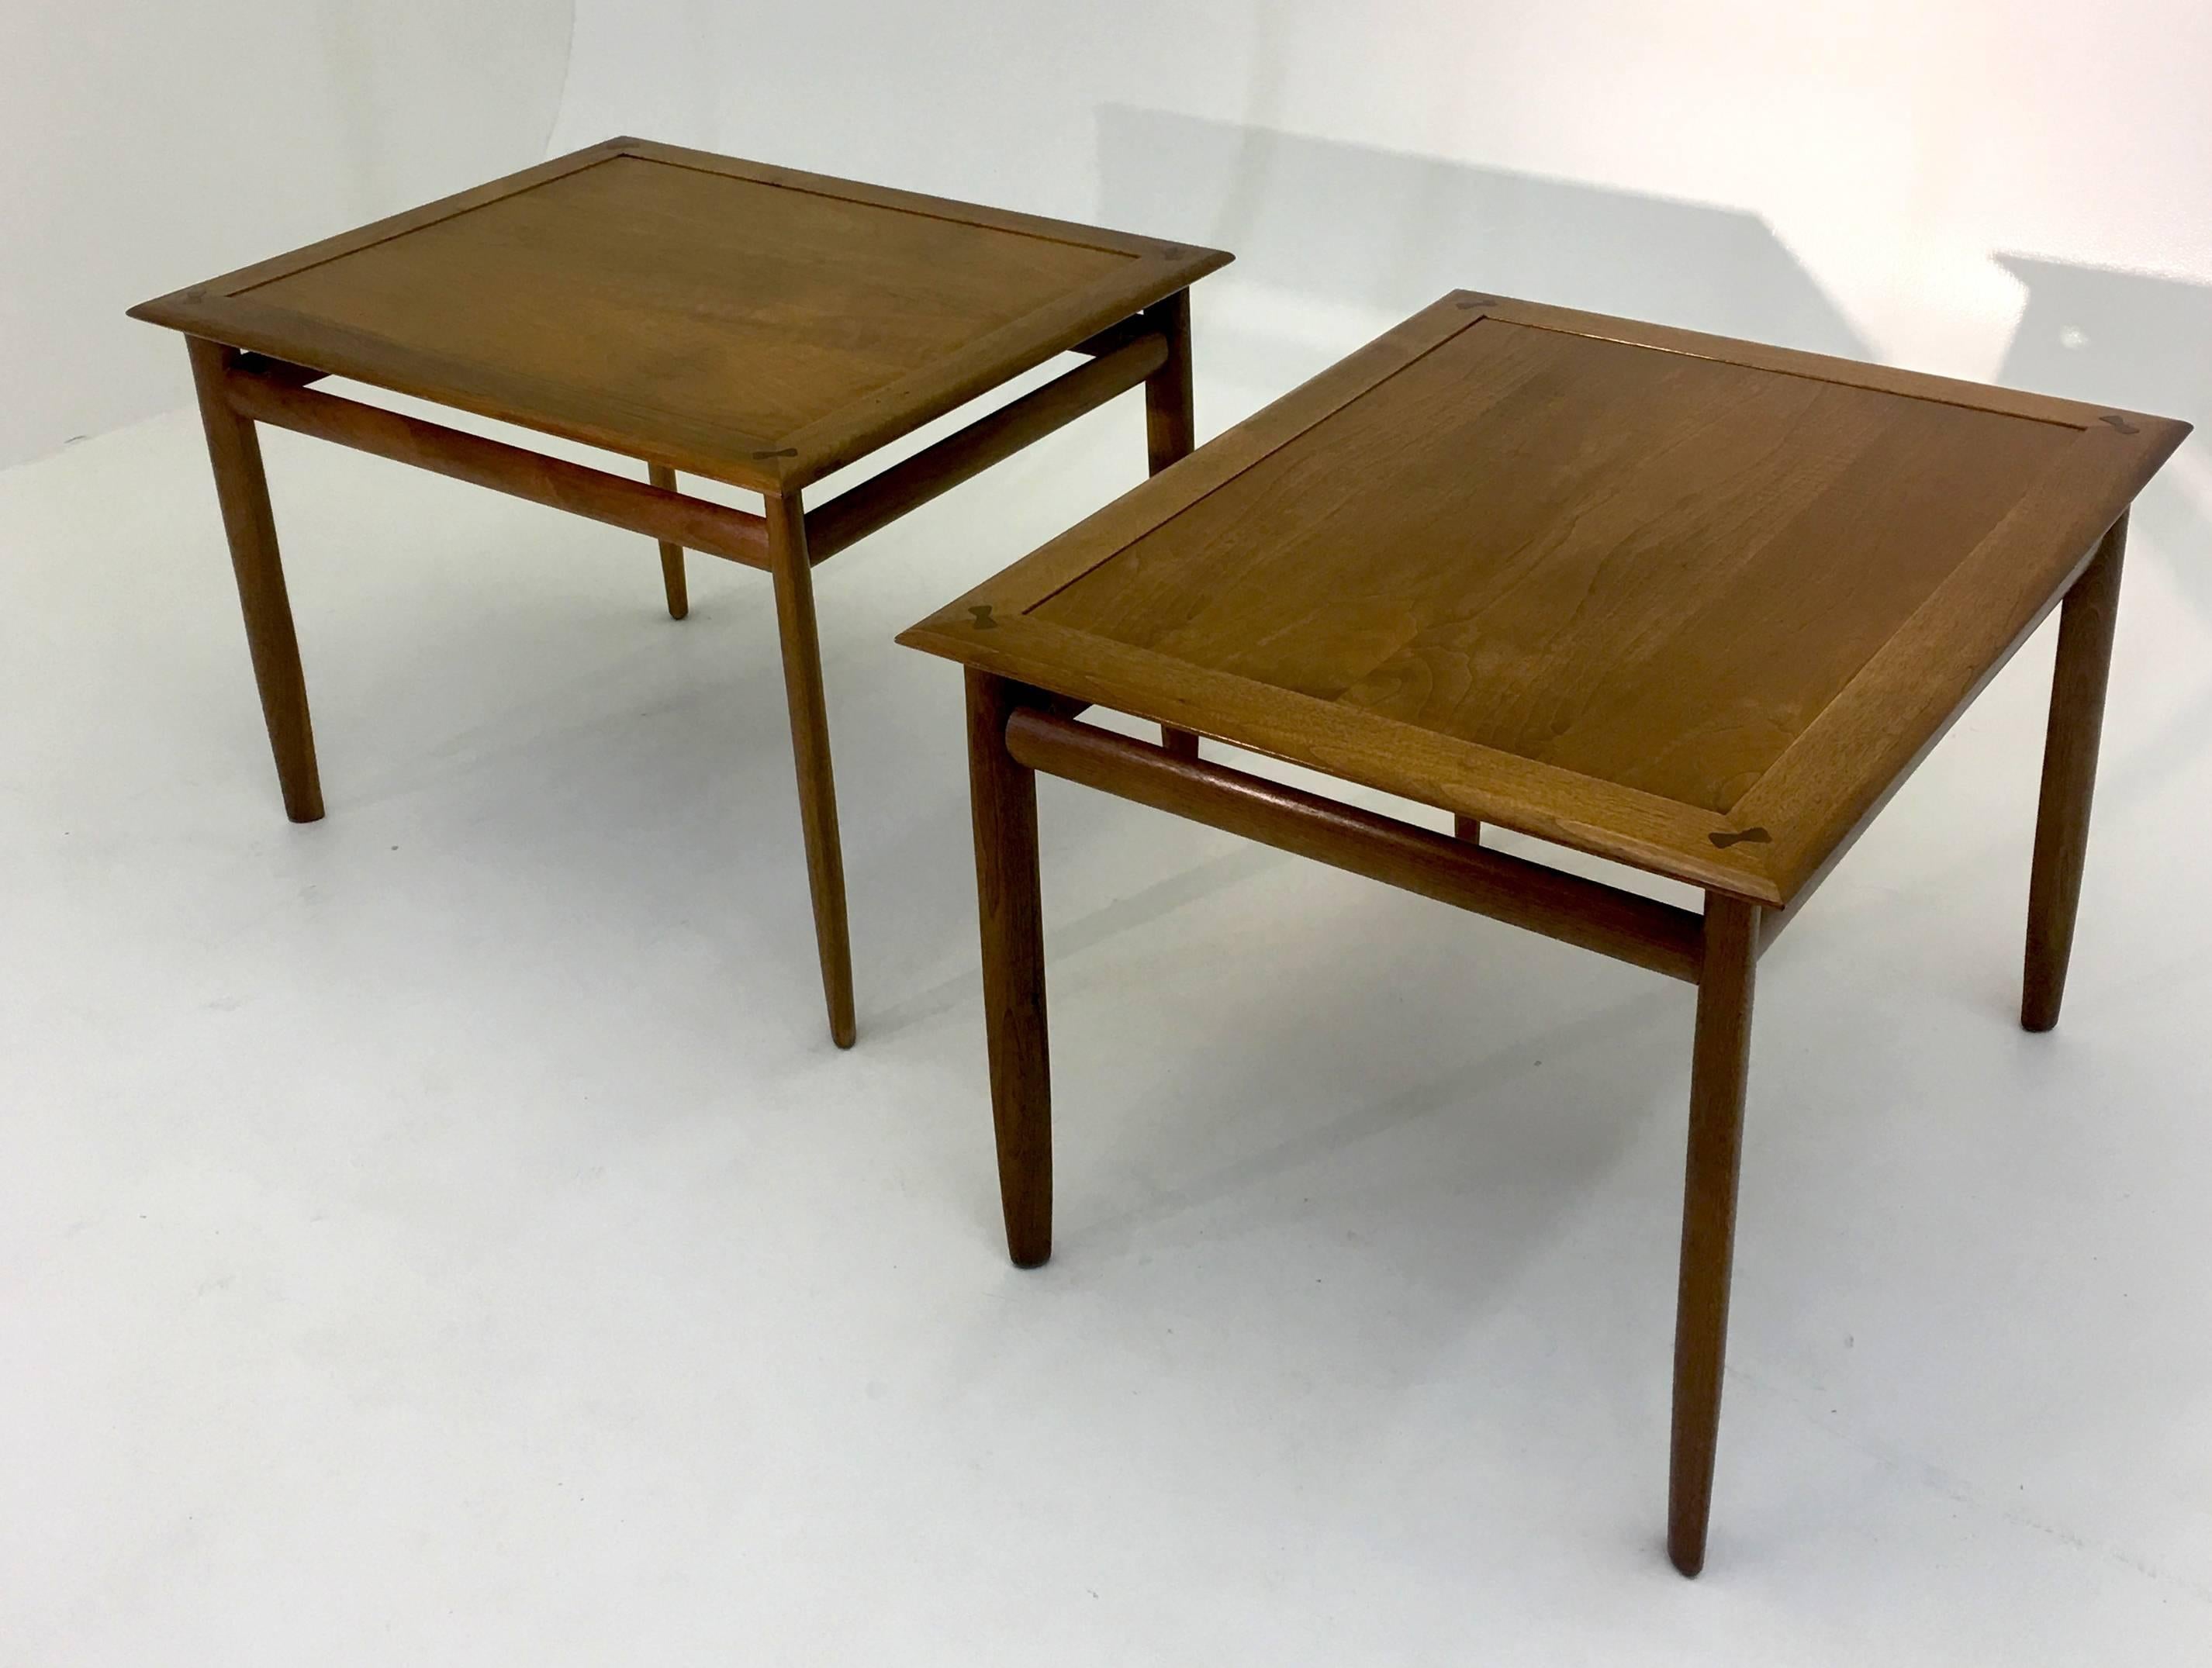 Drexel, Parallel series, designed by Barney Flagg. Produced 1962, USA, walnut
Measures: 30 deep x 24 wide and 21.25 inches tall. All examples signed to the bottom. Stamped and dated 1962. Walnut and in excellent condition with all edges sculpted